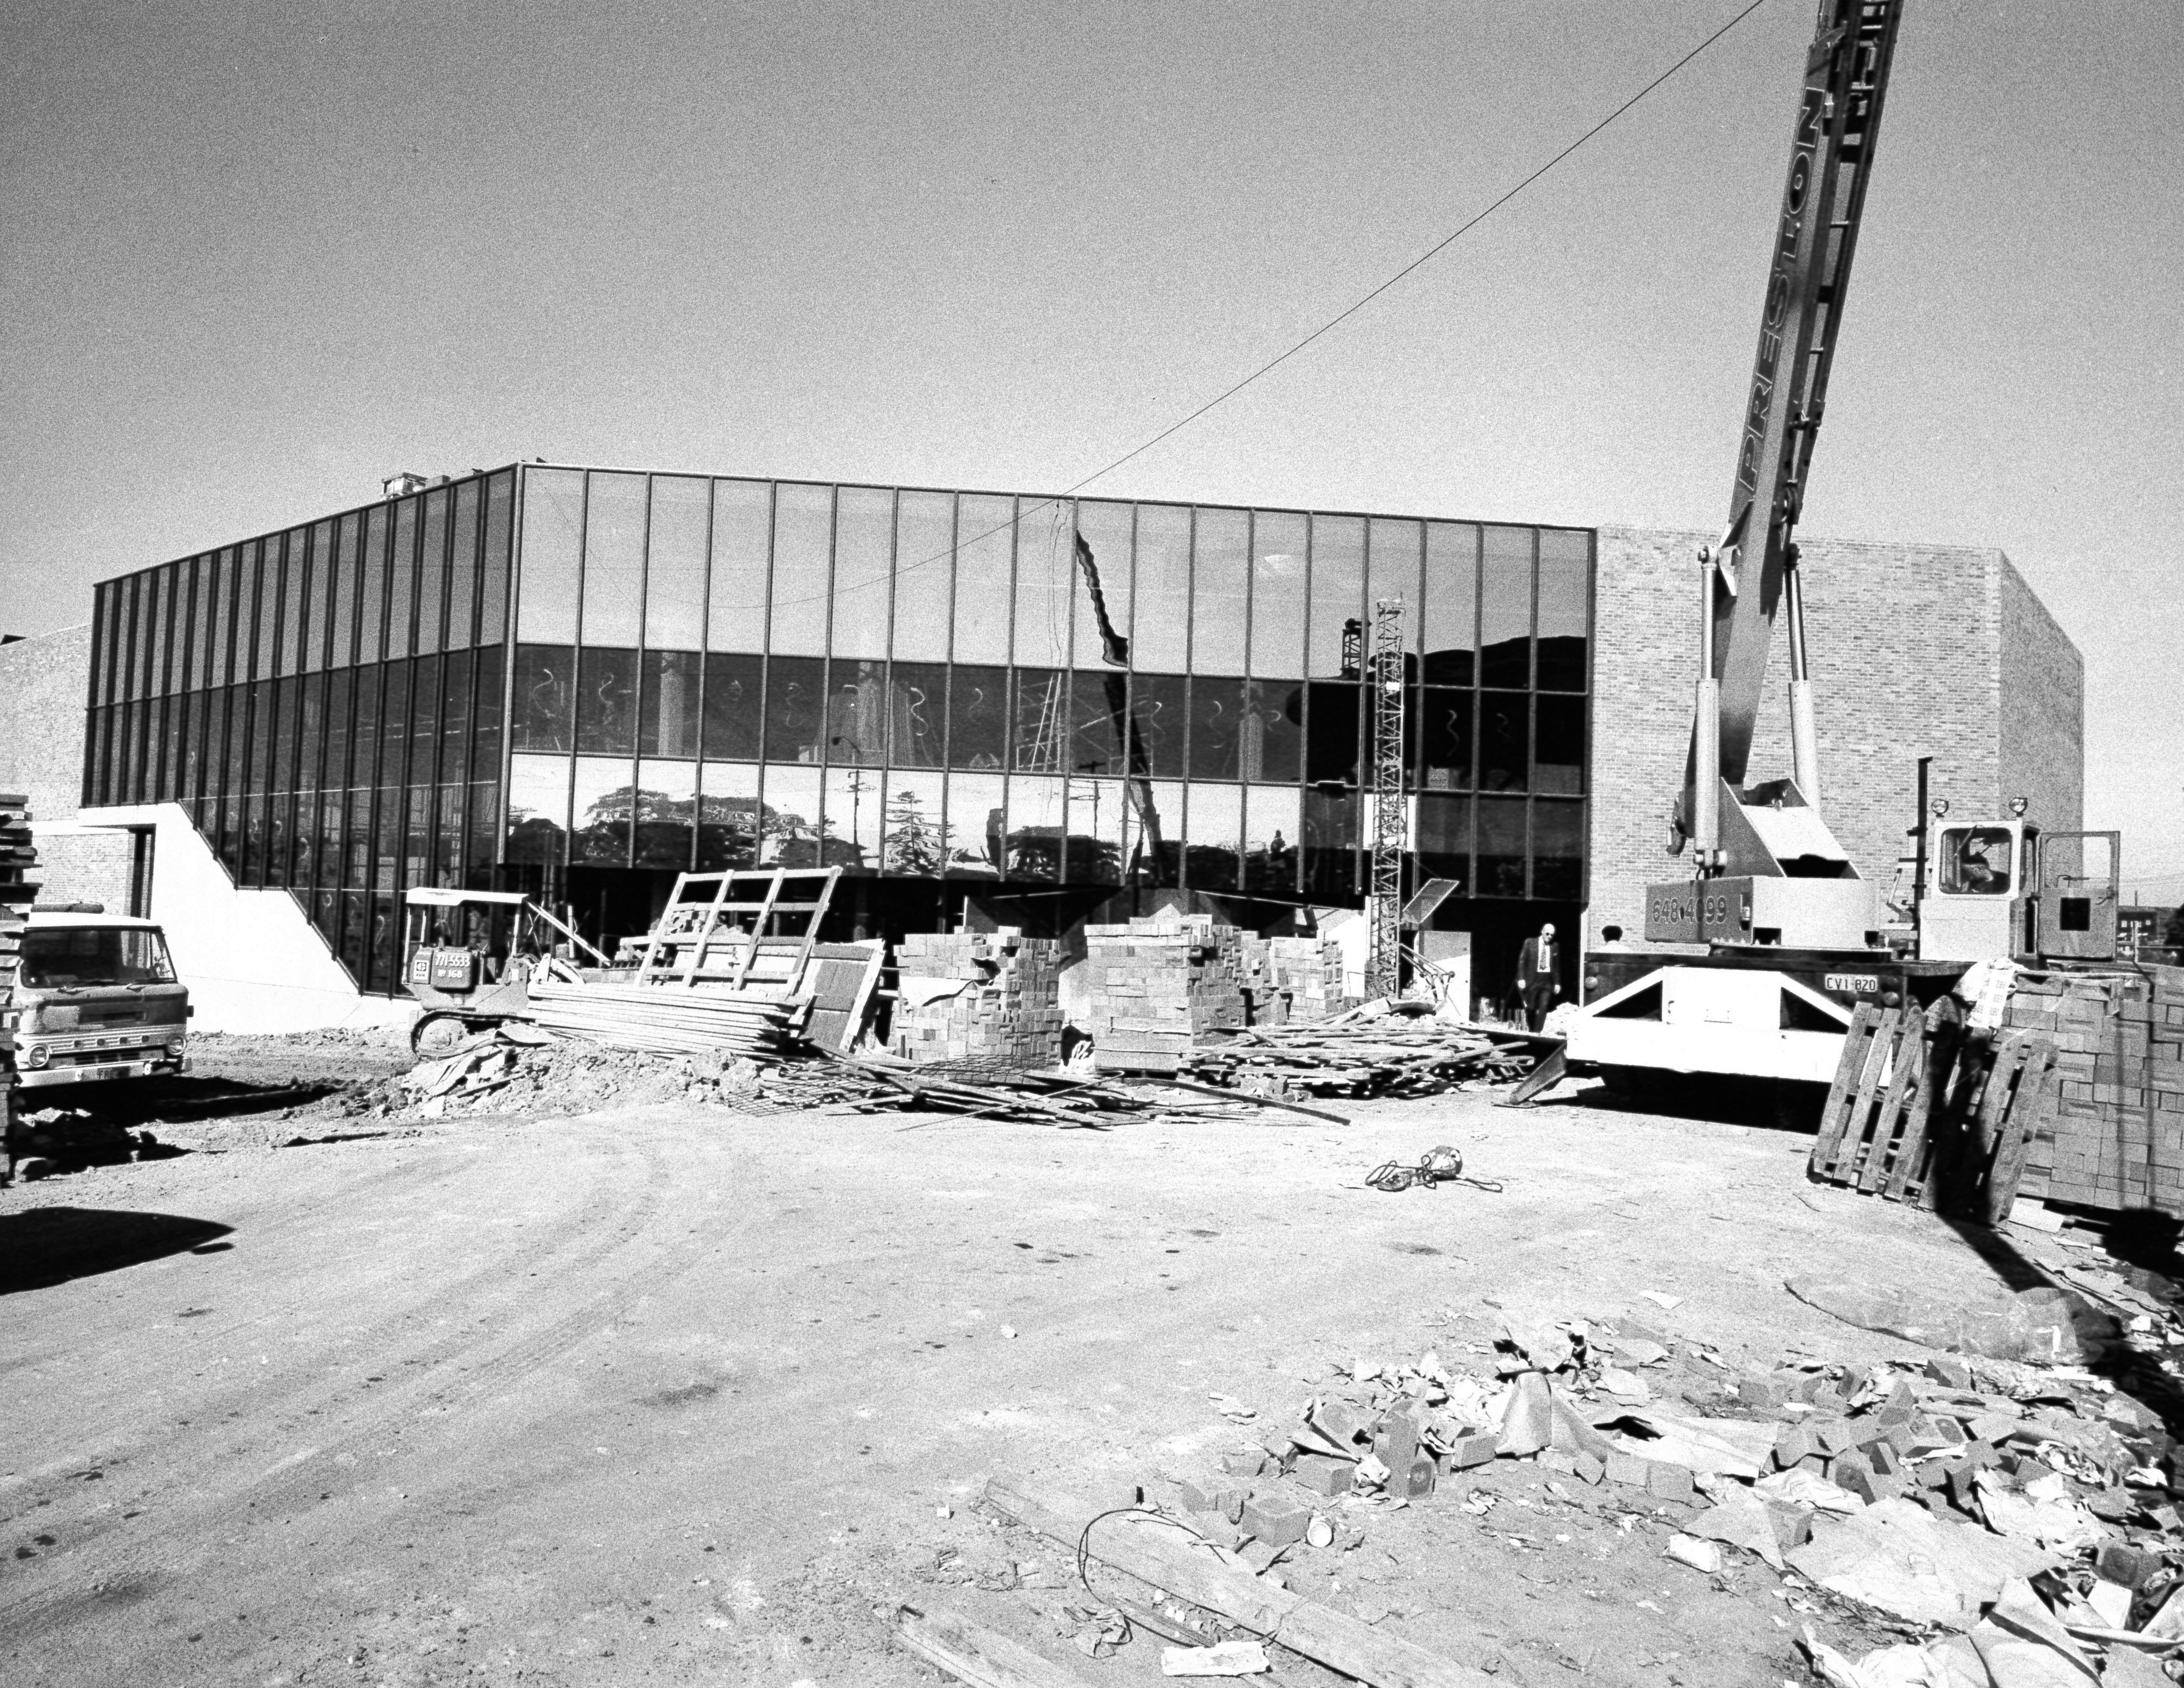 Black and white archival image from 1975 of the Seymour Centre midway through contruction.